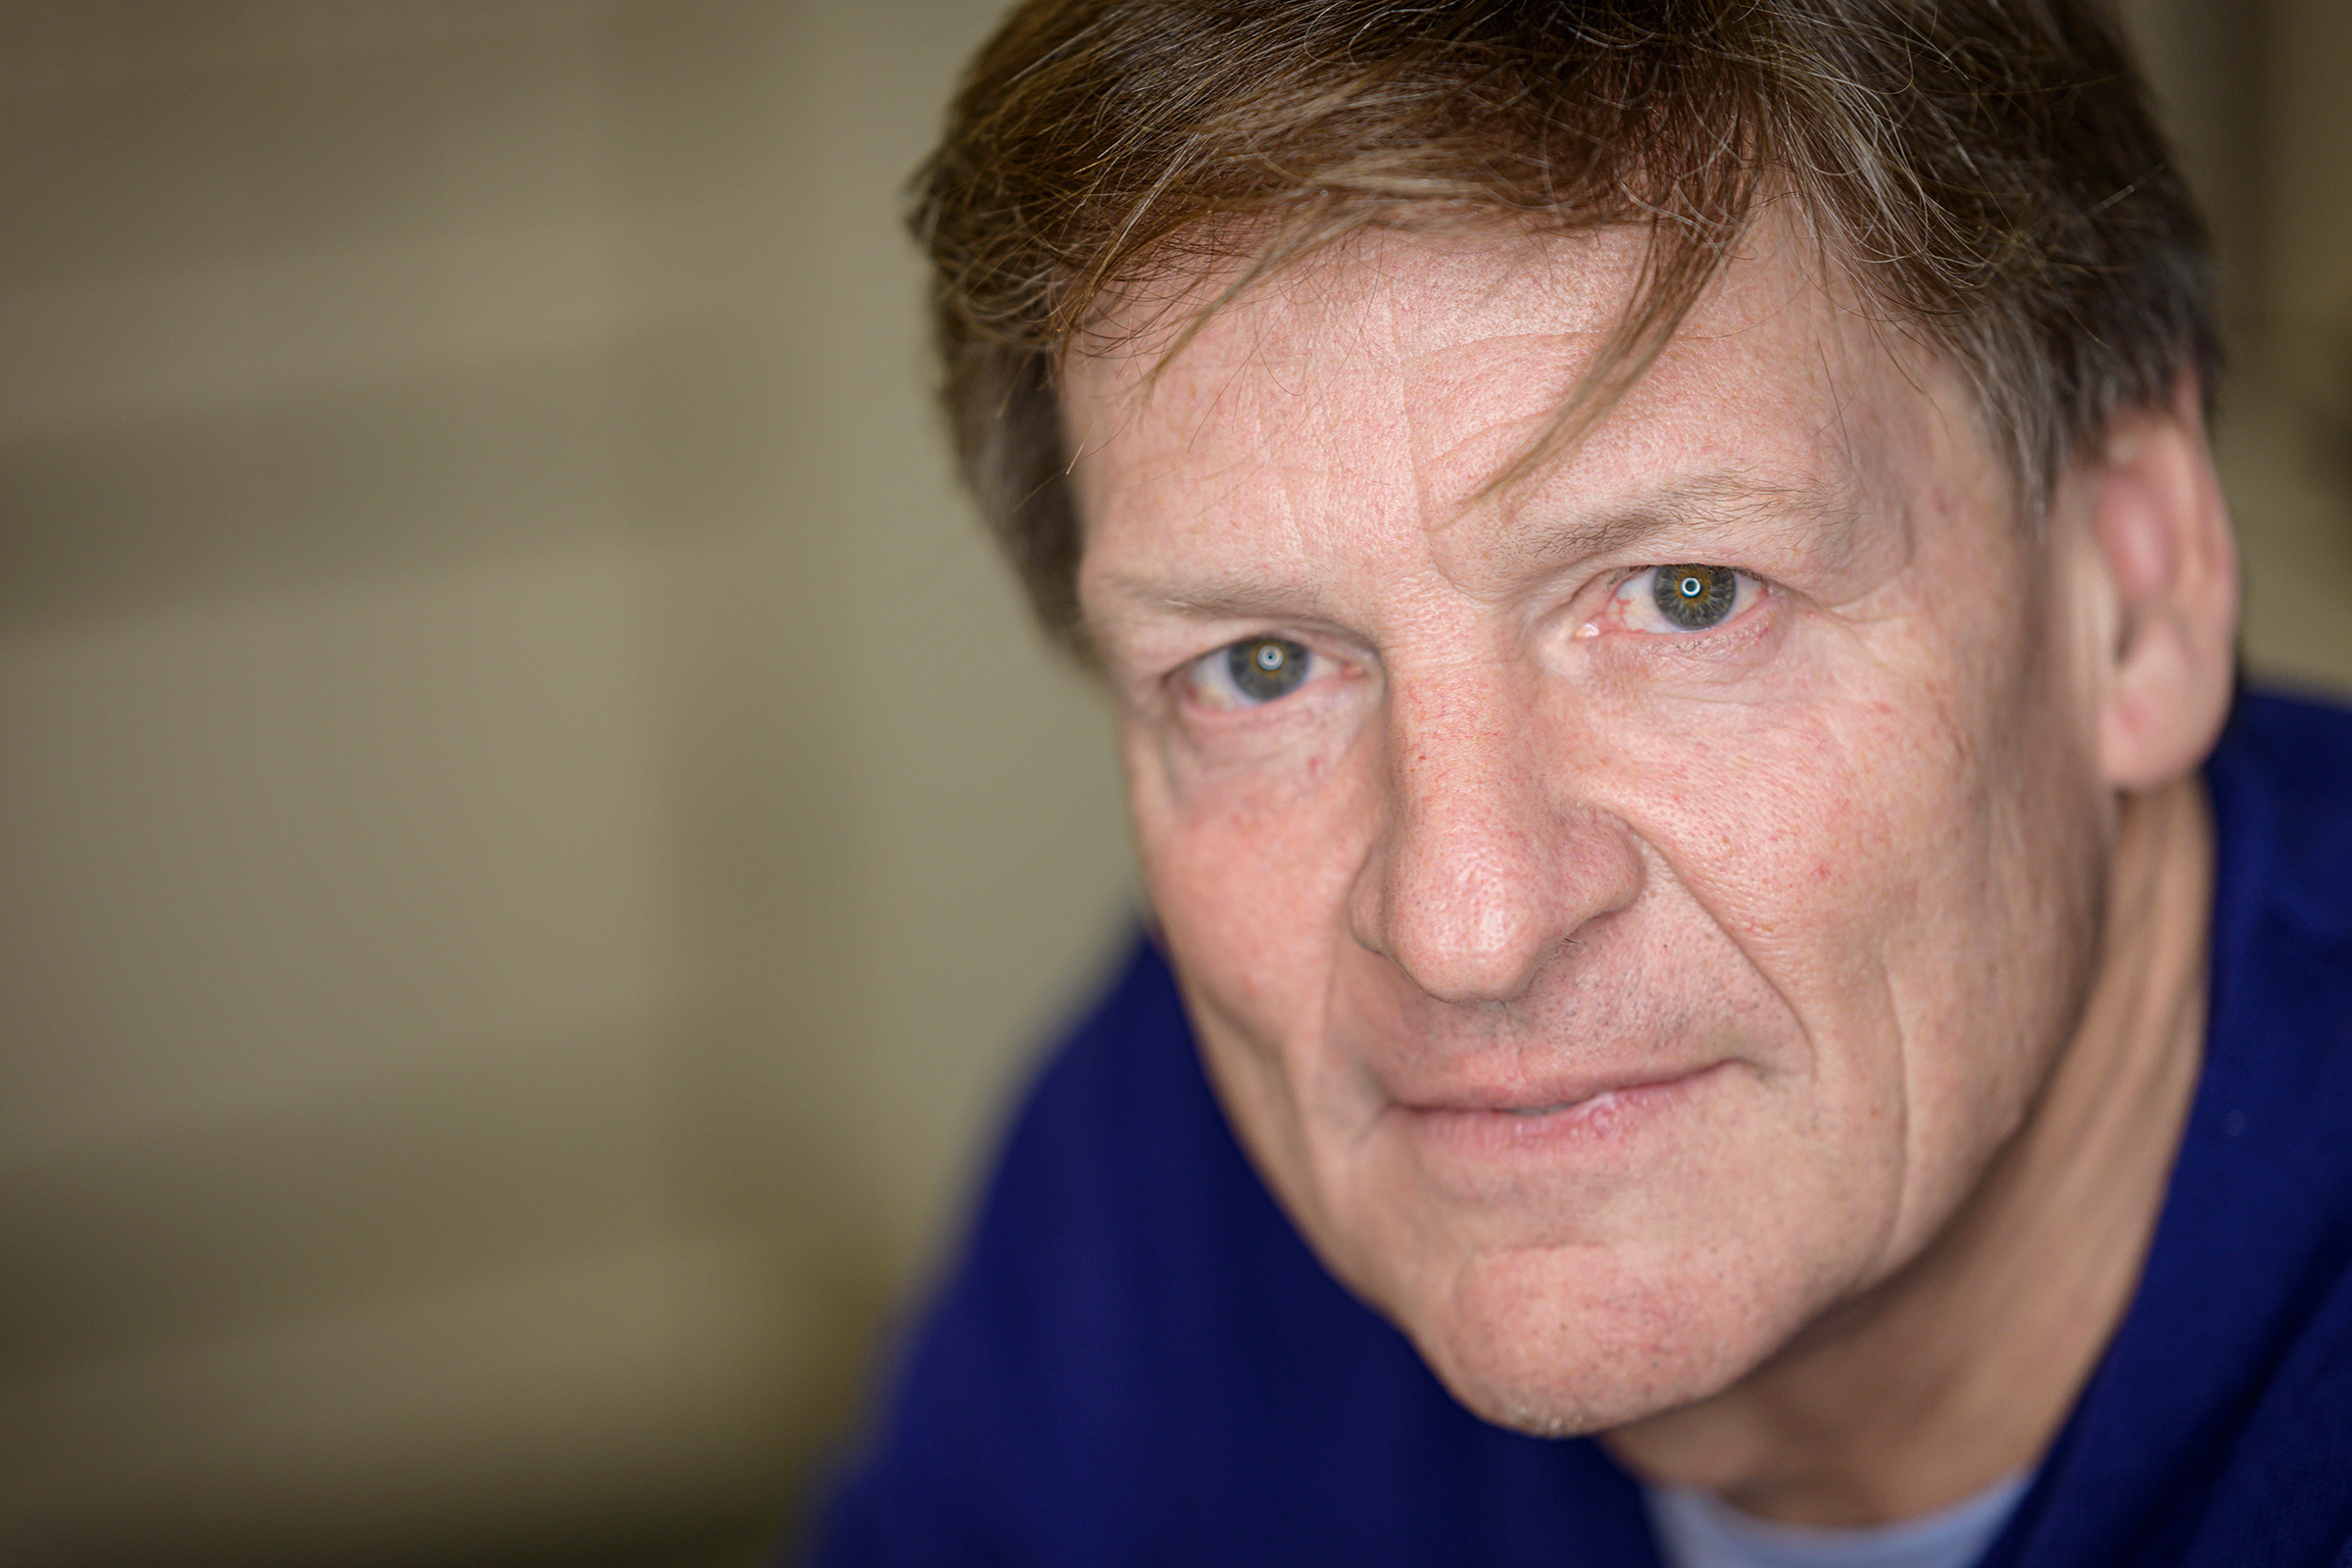 Michael Lewis poses for a portrait in 2019. (Alamy)